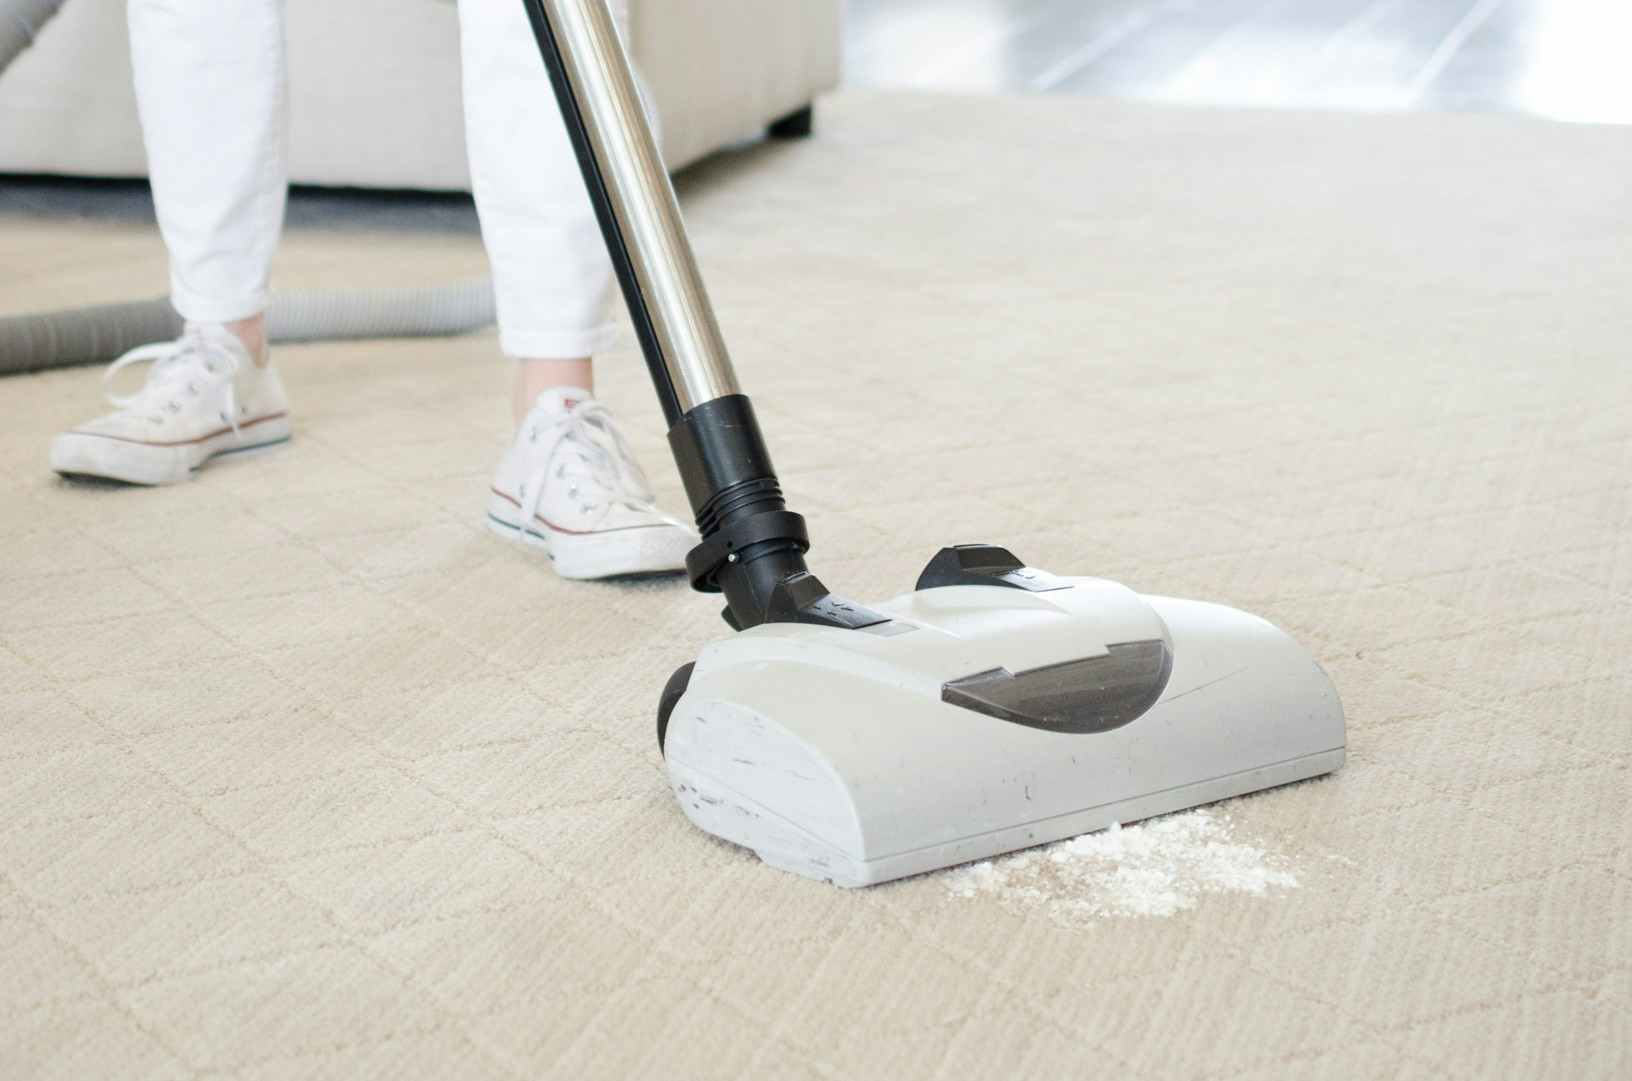 Use baking soda as a carpet and vacuum cleaner.